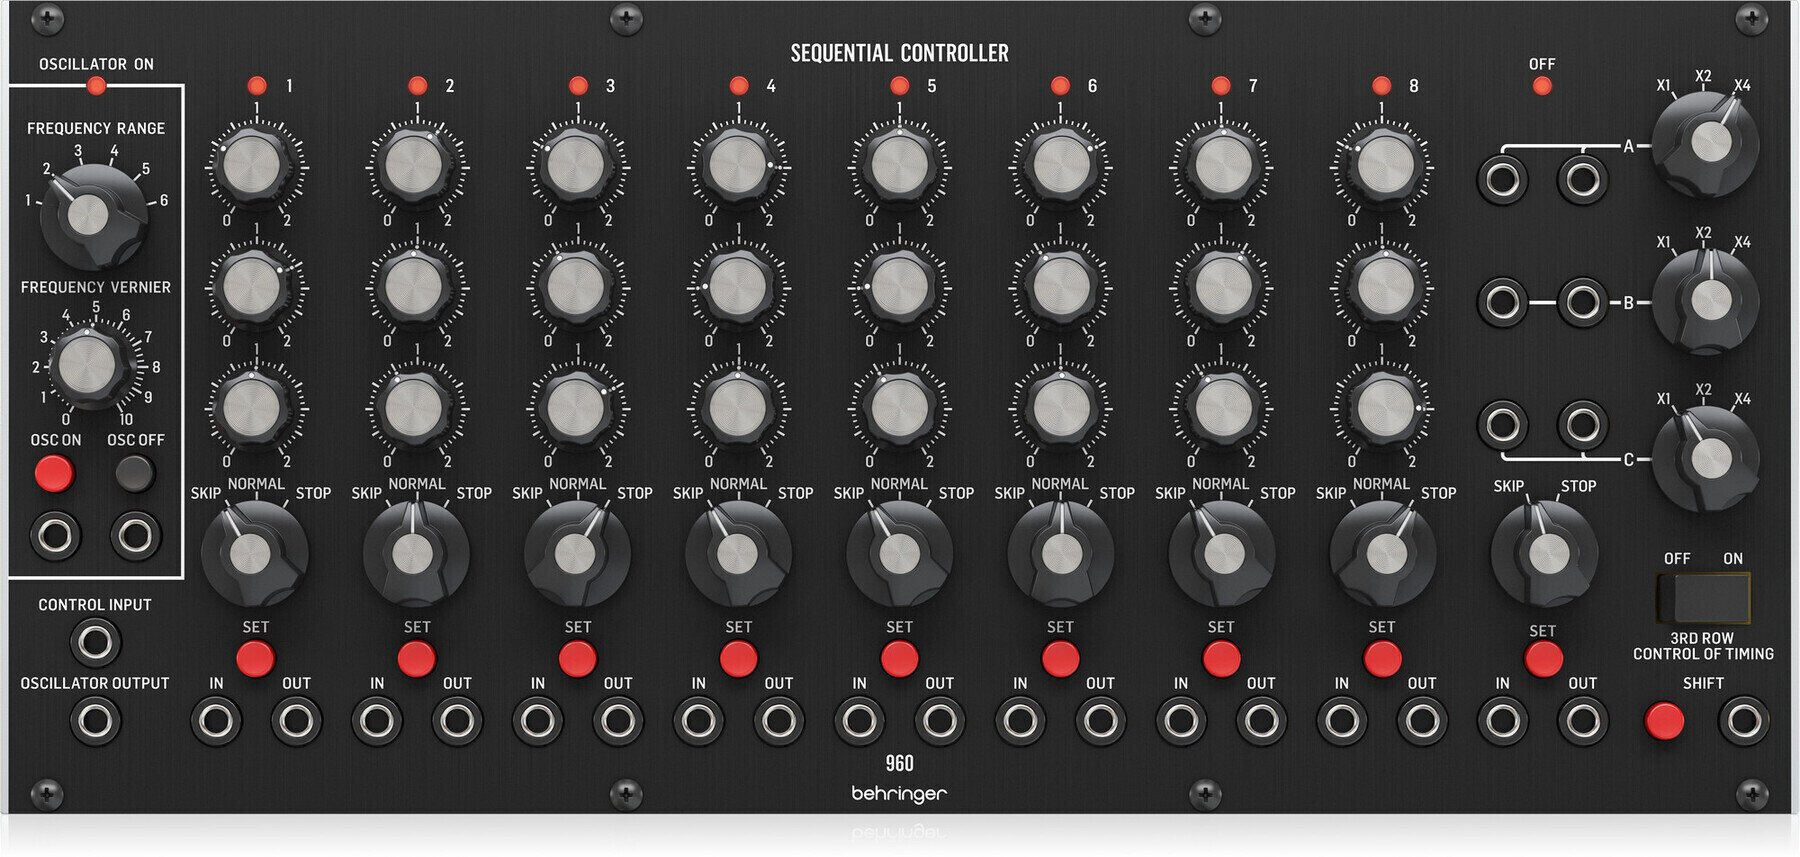 Modulares System Behringer 960 Sequential Controller